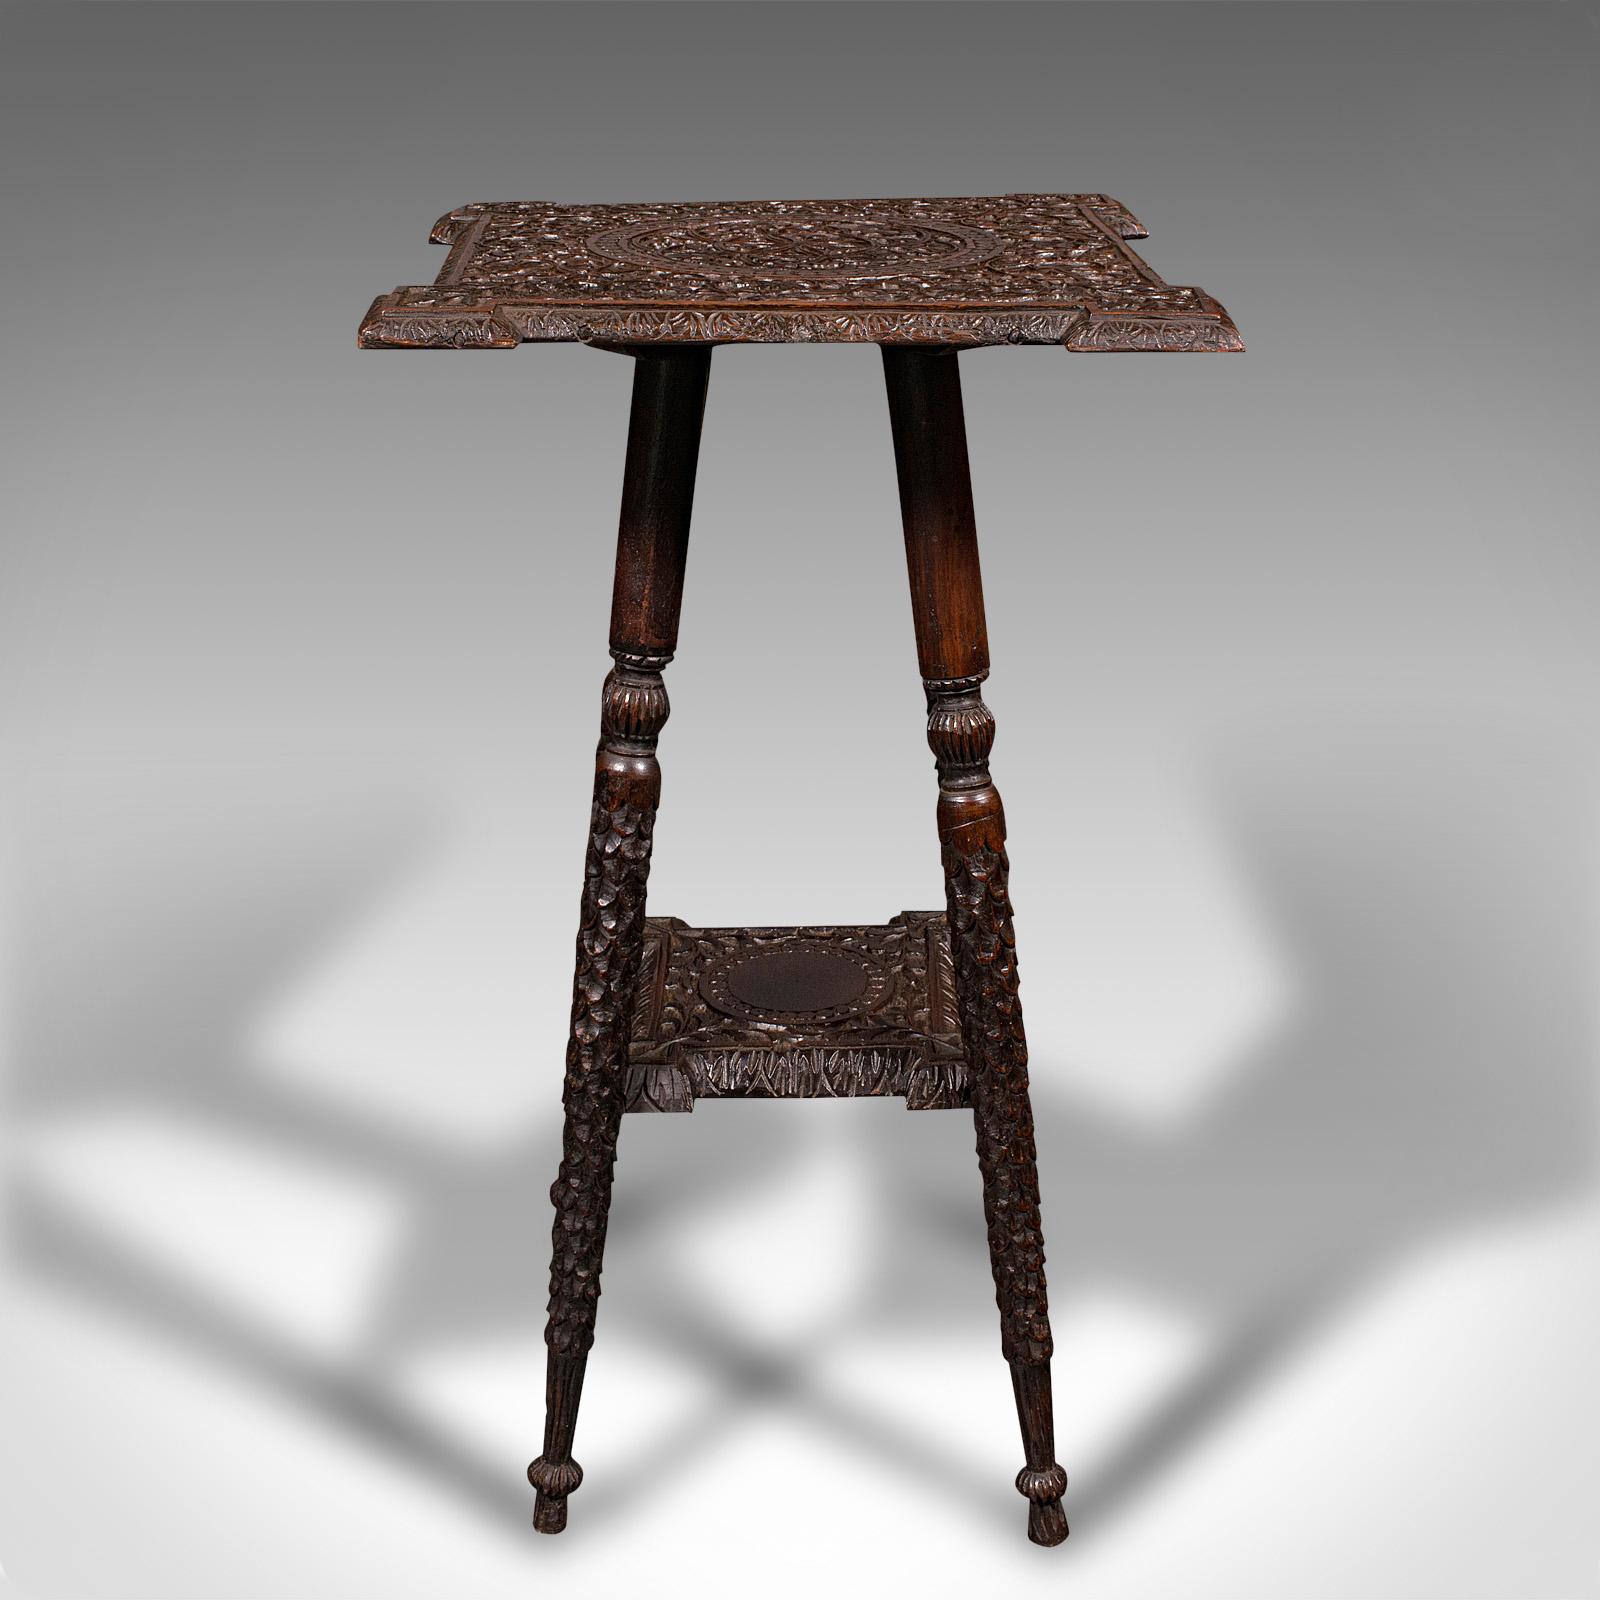 19th Century Small Antique Lamp Table, Indian, Carved Teak, Decorative, Occasional, Victorian